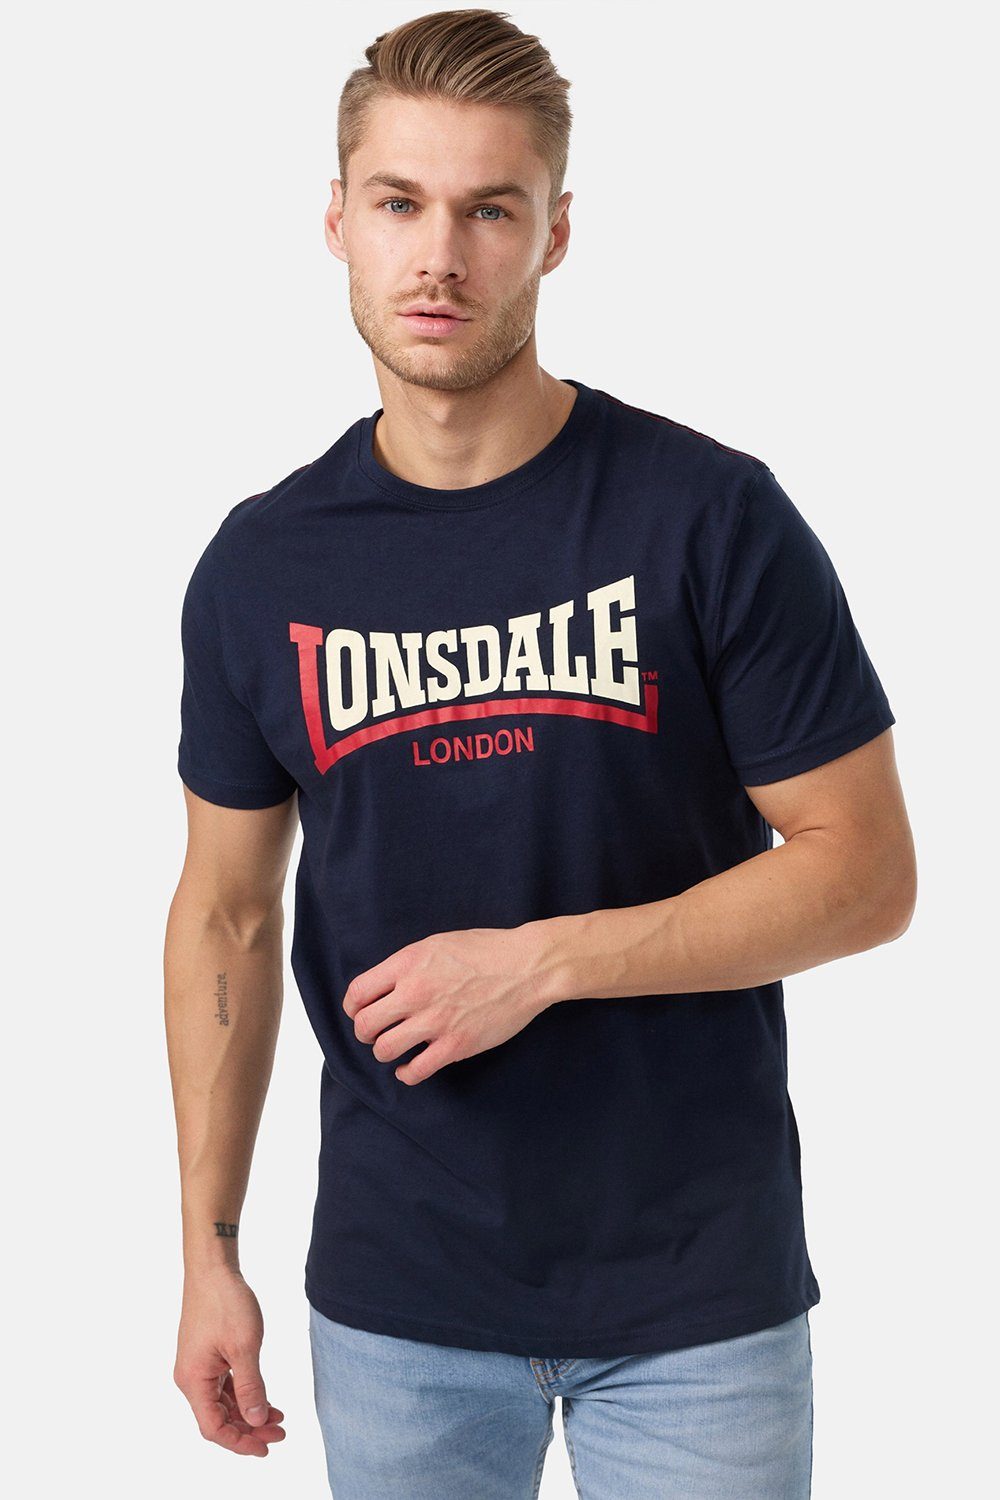 Lonsdale T-Shirt TWO TONE Navy